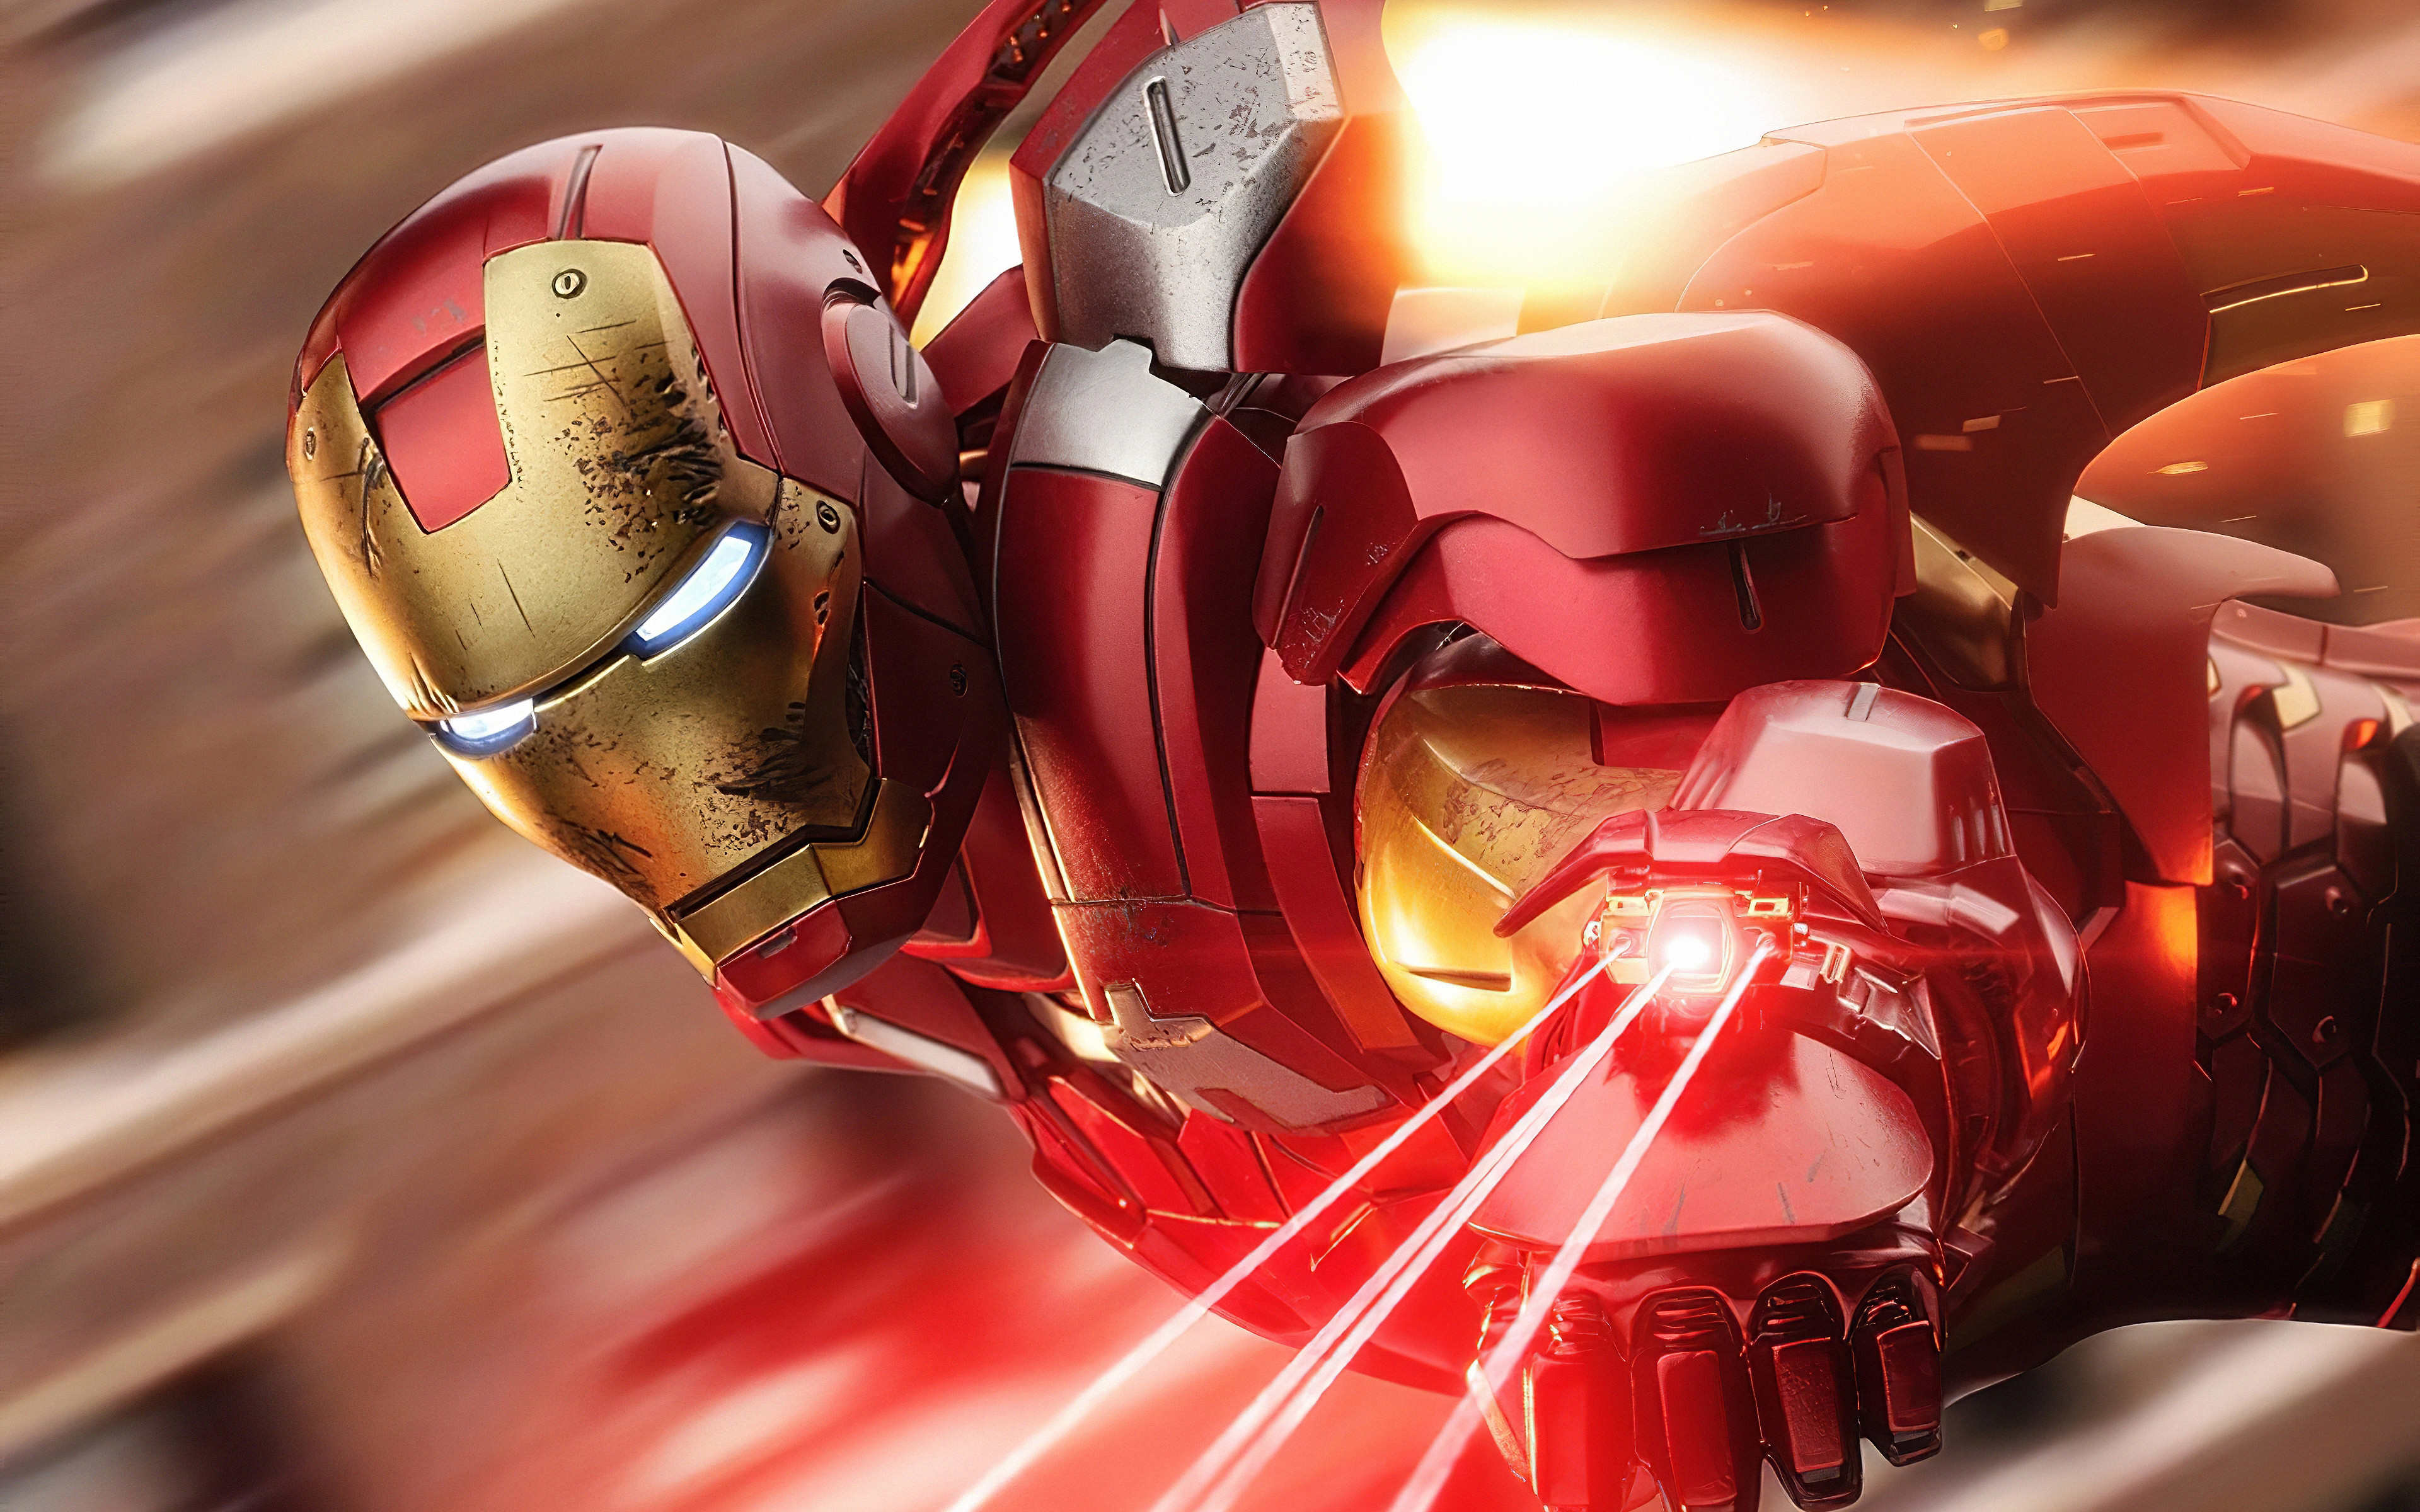 Download wallpaper 4k, IronMan, red neon rays, superheroes, battle, DC Comics, Iron Man, artwork, Ironman 4K for desktop with resolution 3840x2400. High Quality HD picture wallpaper